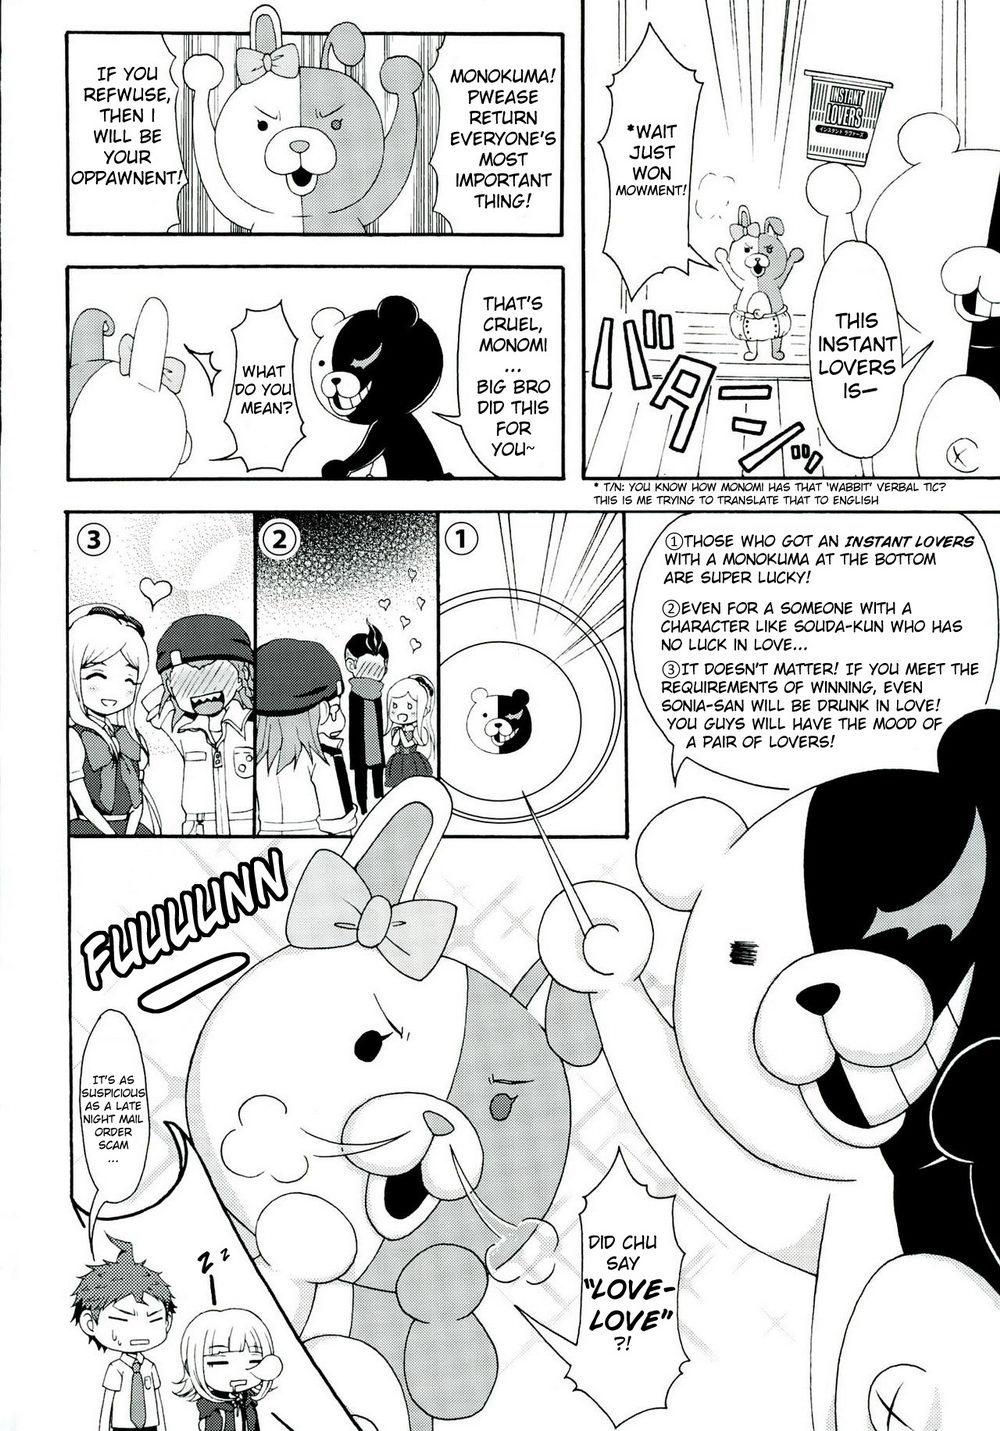 Amatures Gone Wild INSTANT LOVERS - Danganronpa Gay Studs - Page 10